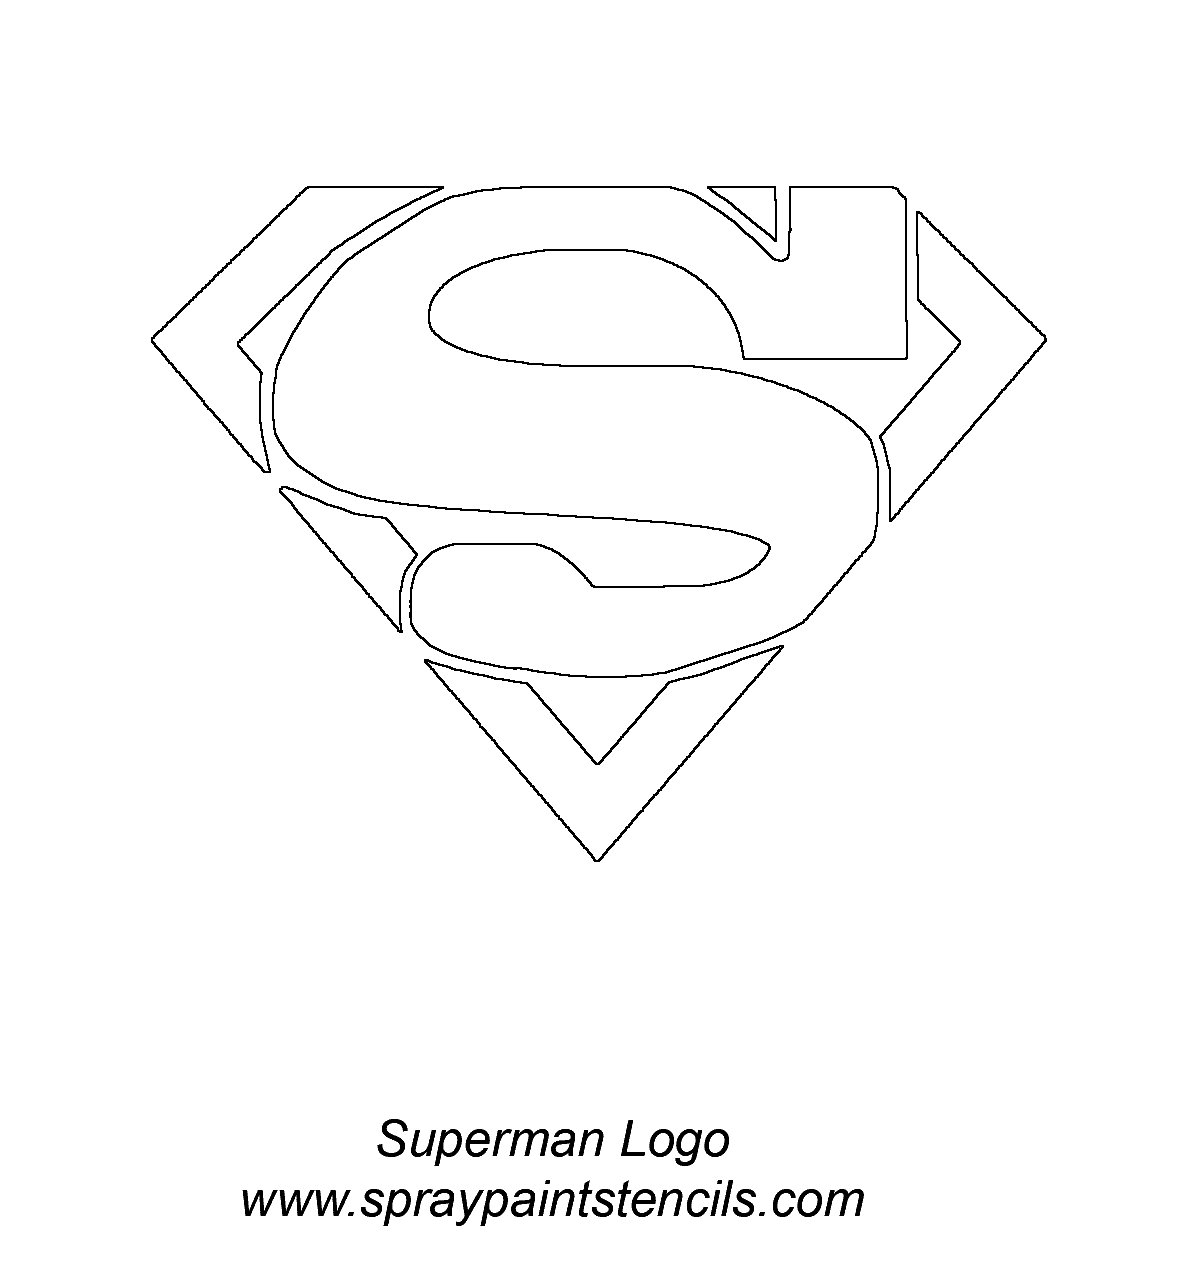 Superman logo coloring page, superman logo coloring pages ...